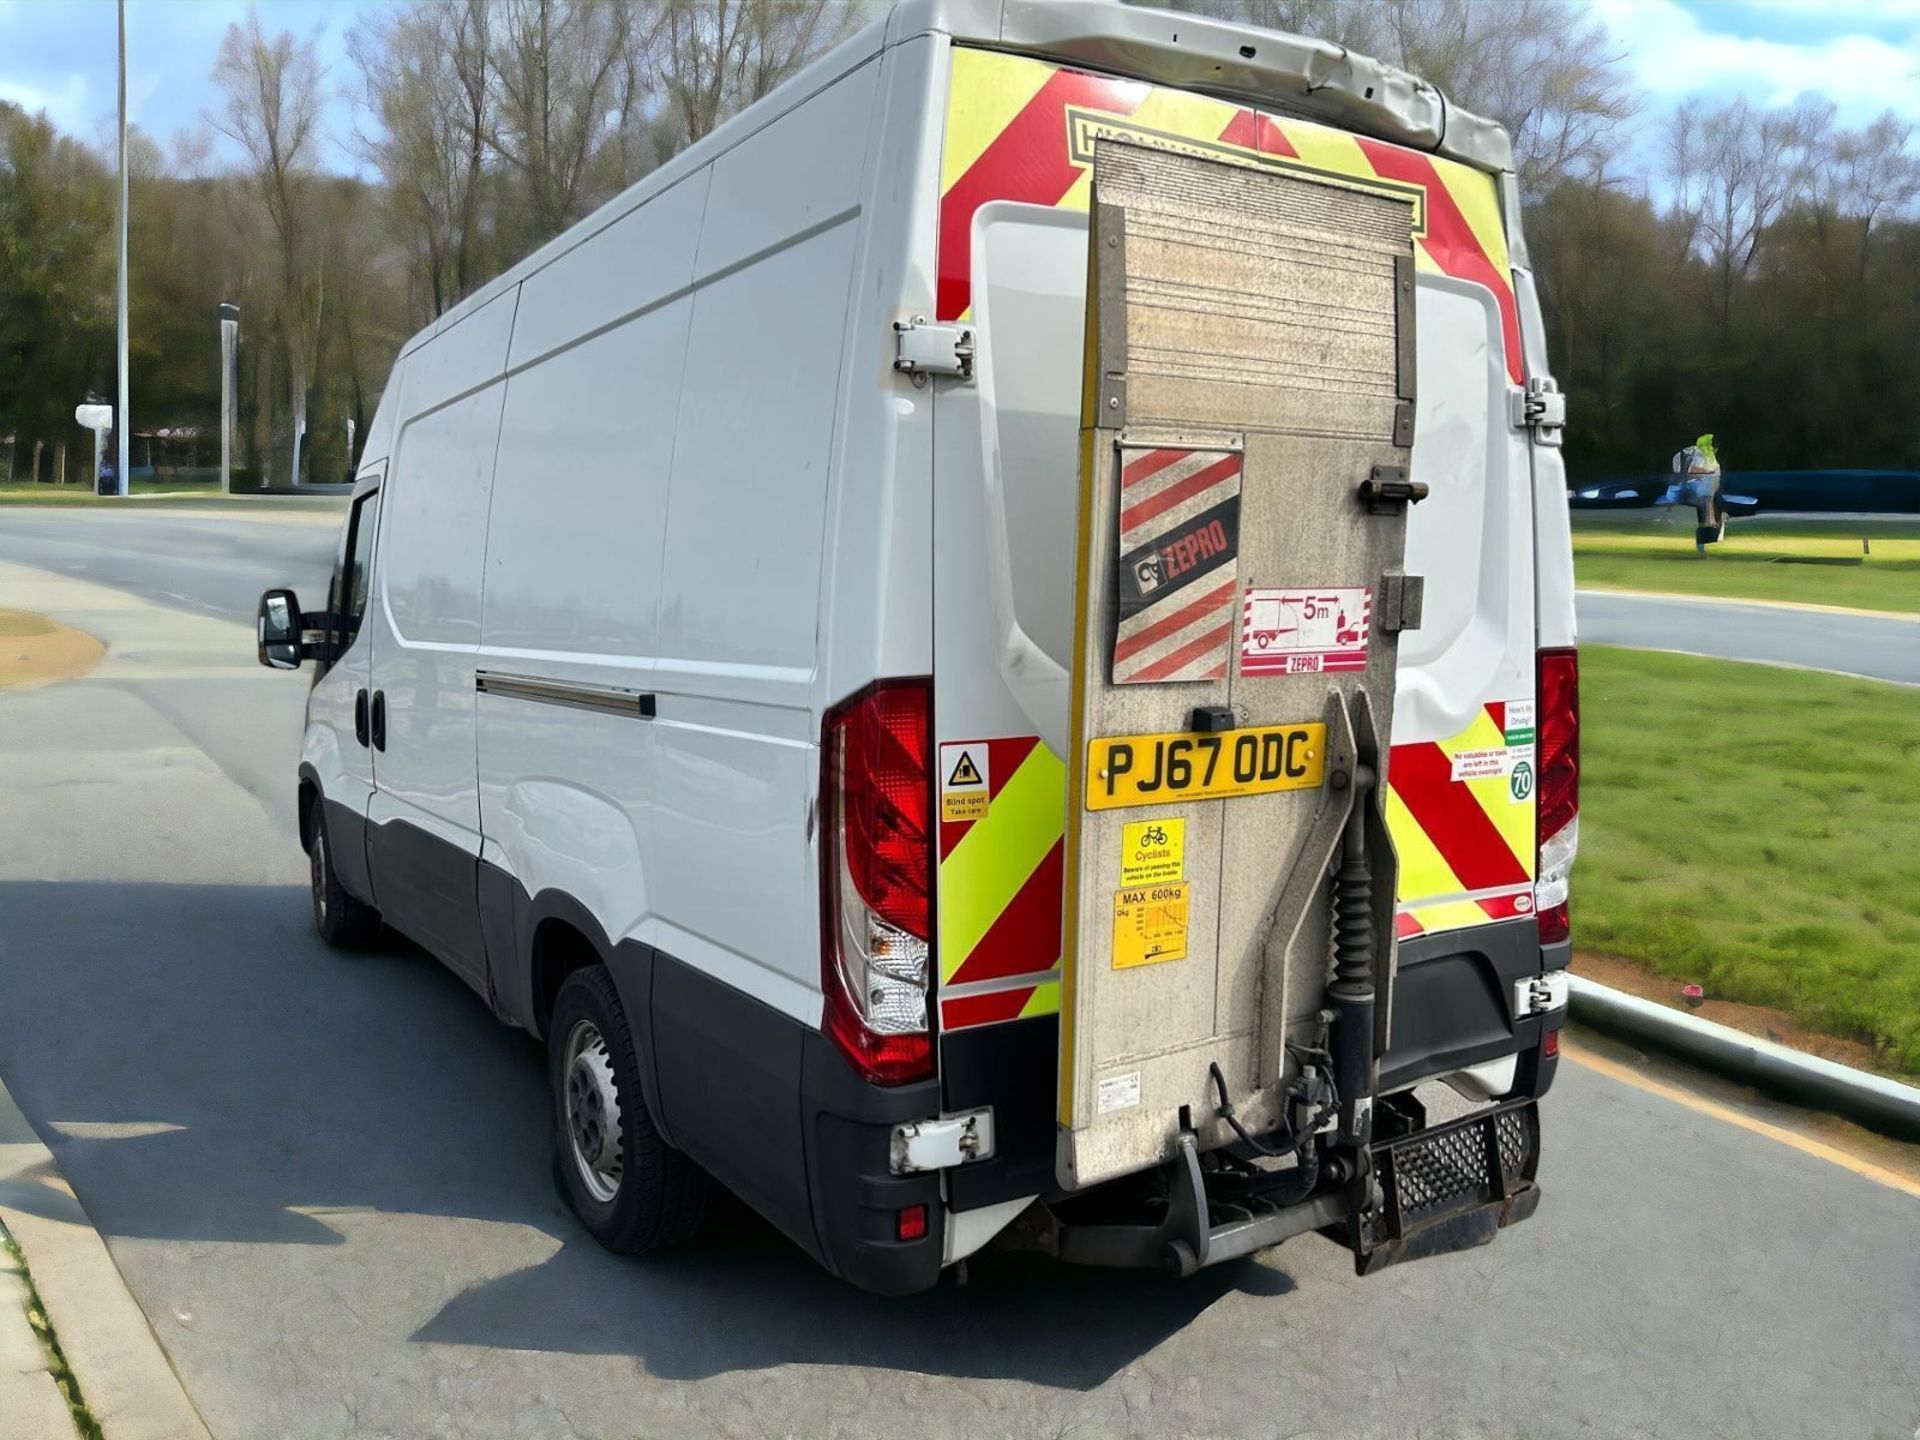 2017-67 REG IVECO DAILY 35S -HPI CLEAR - READY FOR WORK! - Image 3 of 12